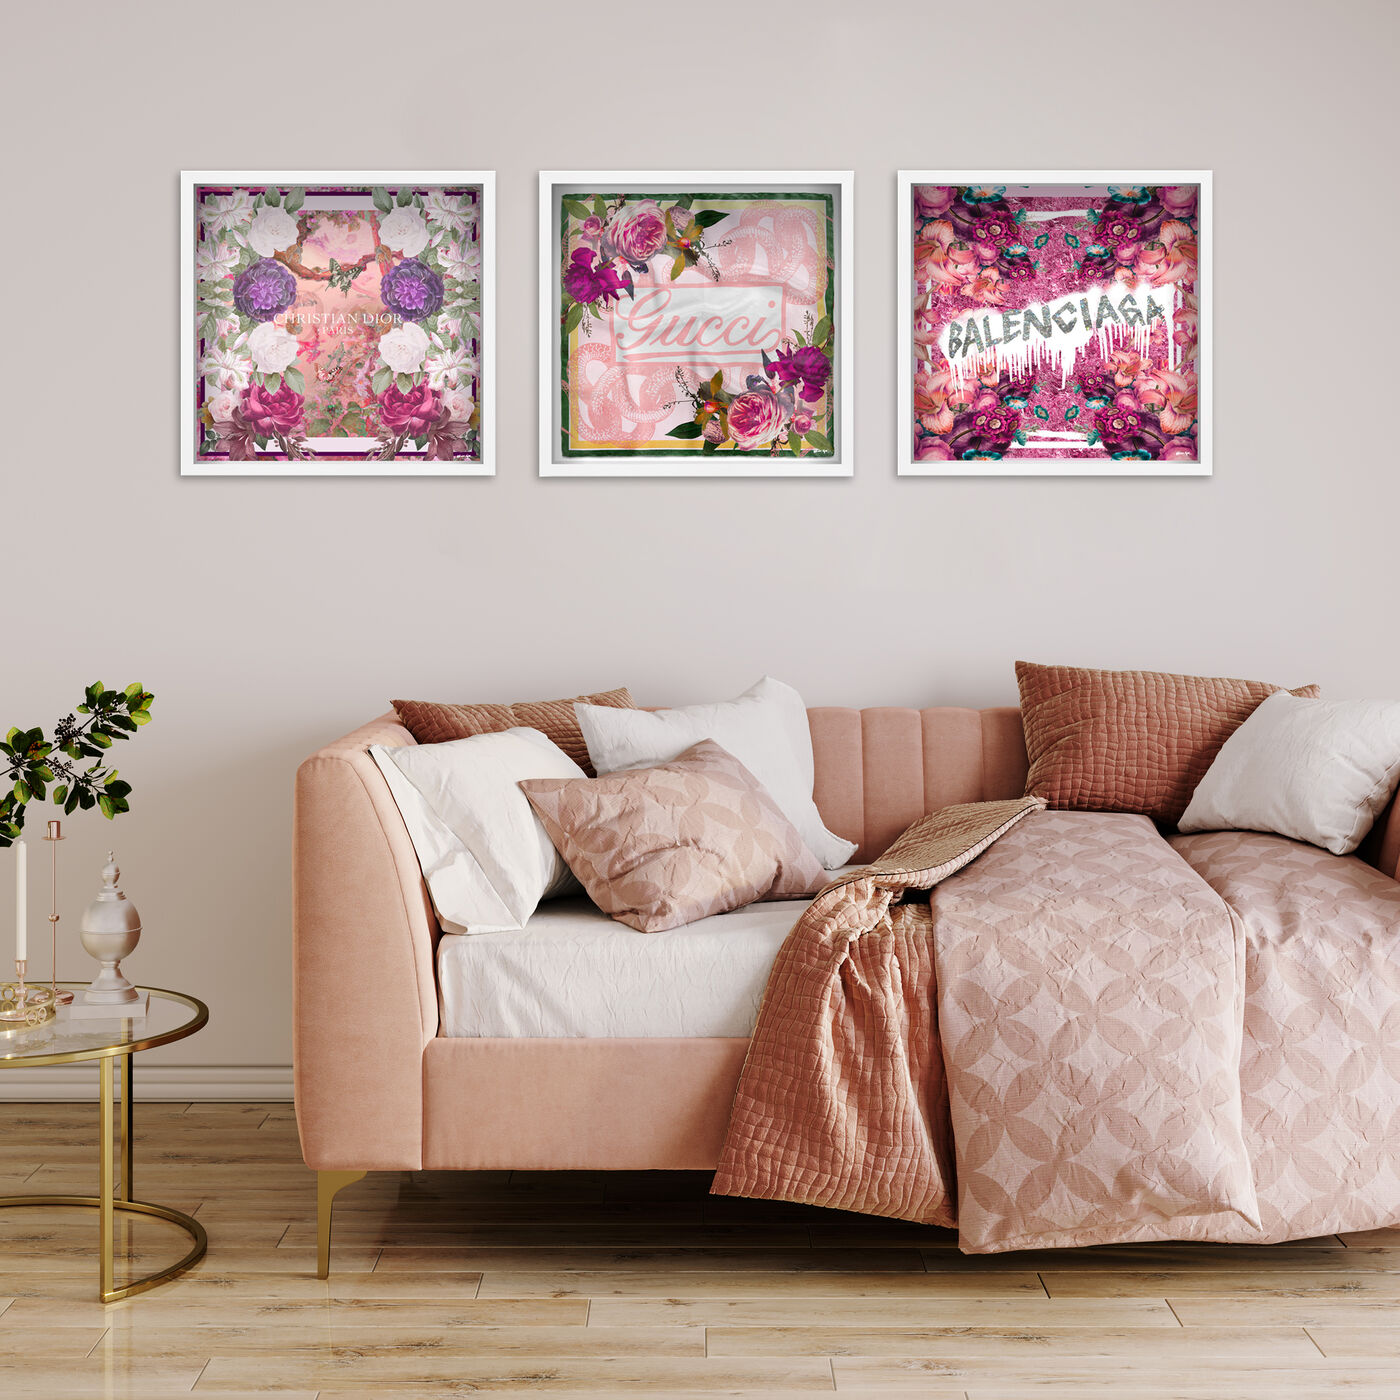 Pink Cube Floral Set of 3 - Displayed on a Shadowbox